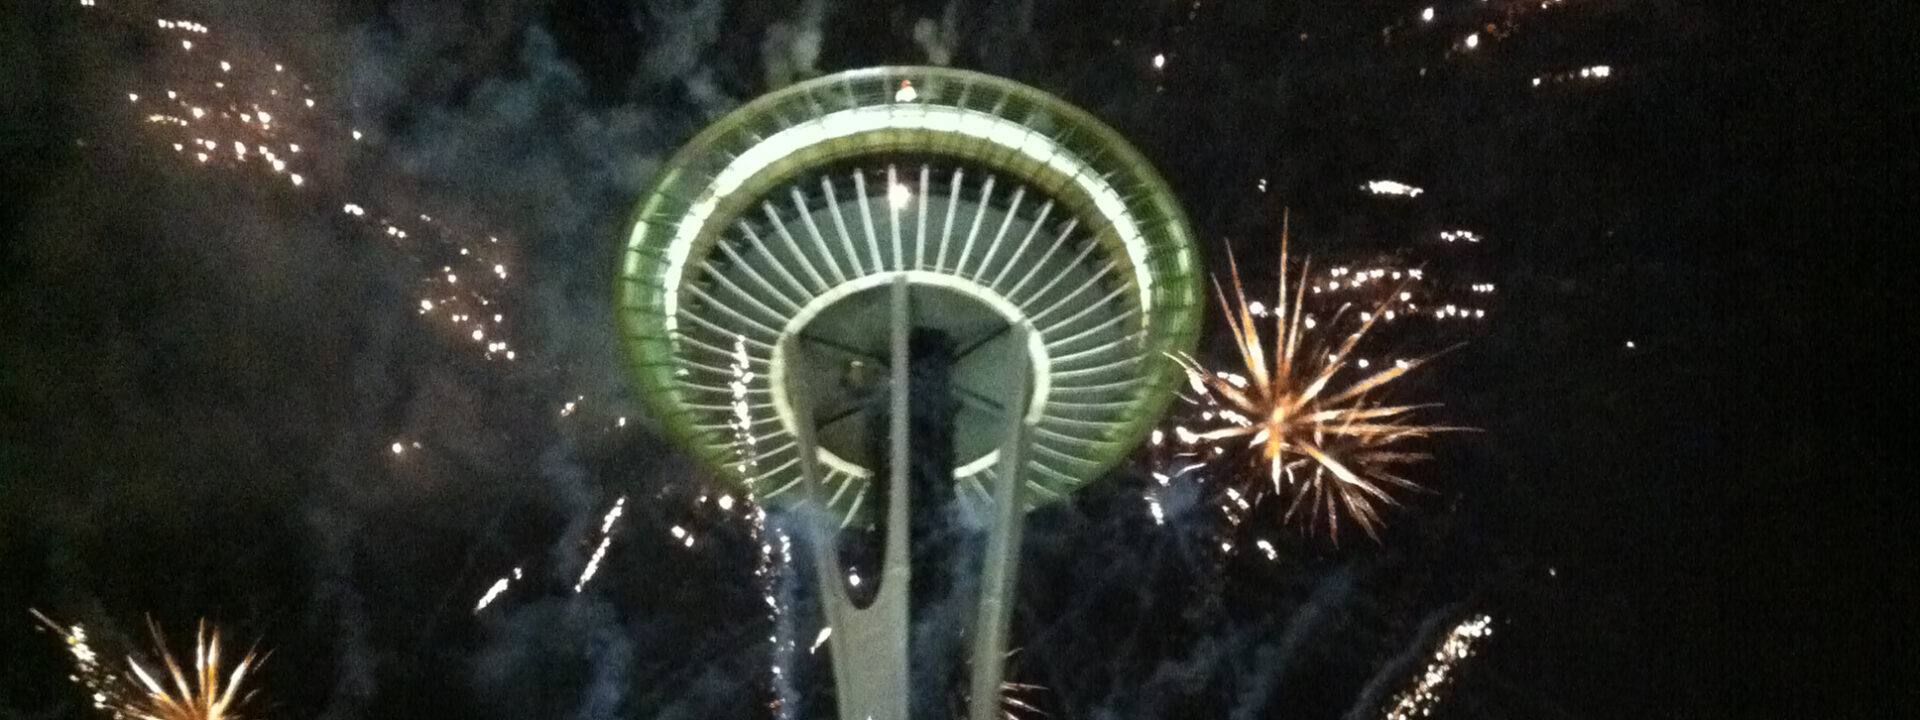 New Year’s Eve at the Space Needle in Seattle